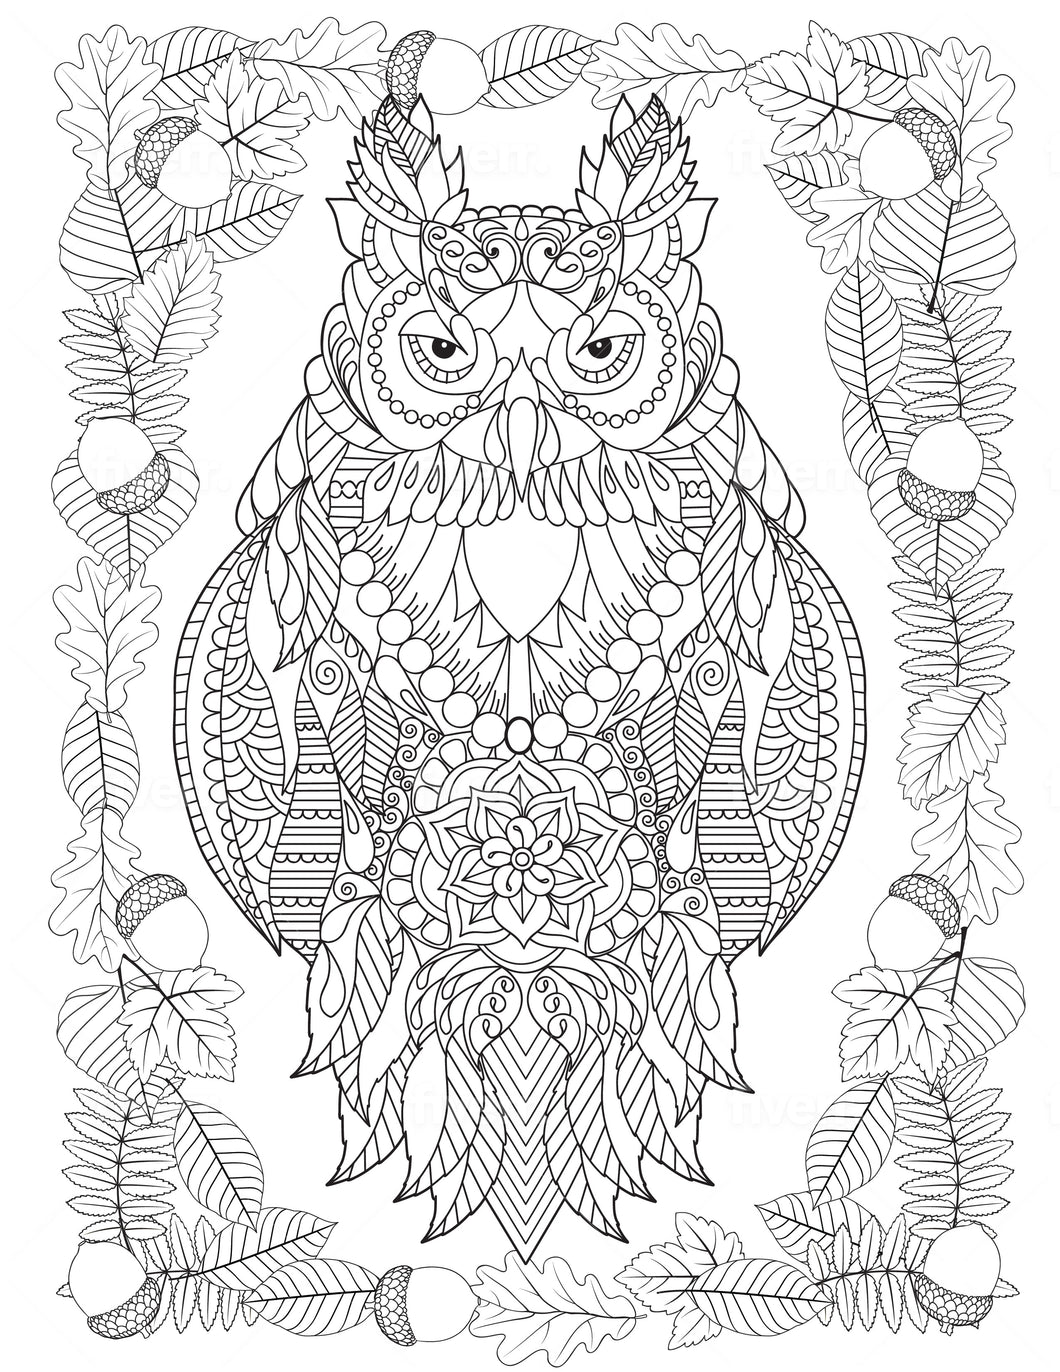 Owl #2 Coloring Sheet - Goin Postal Brentwood